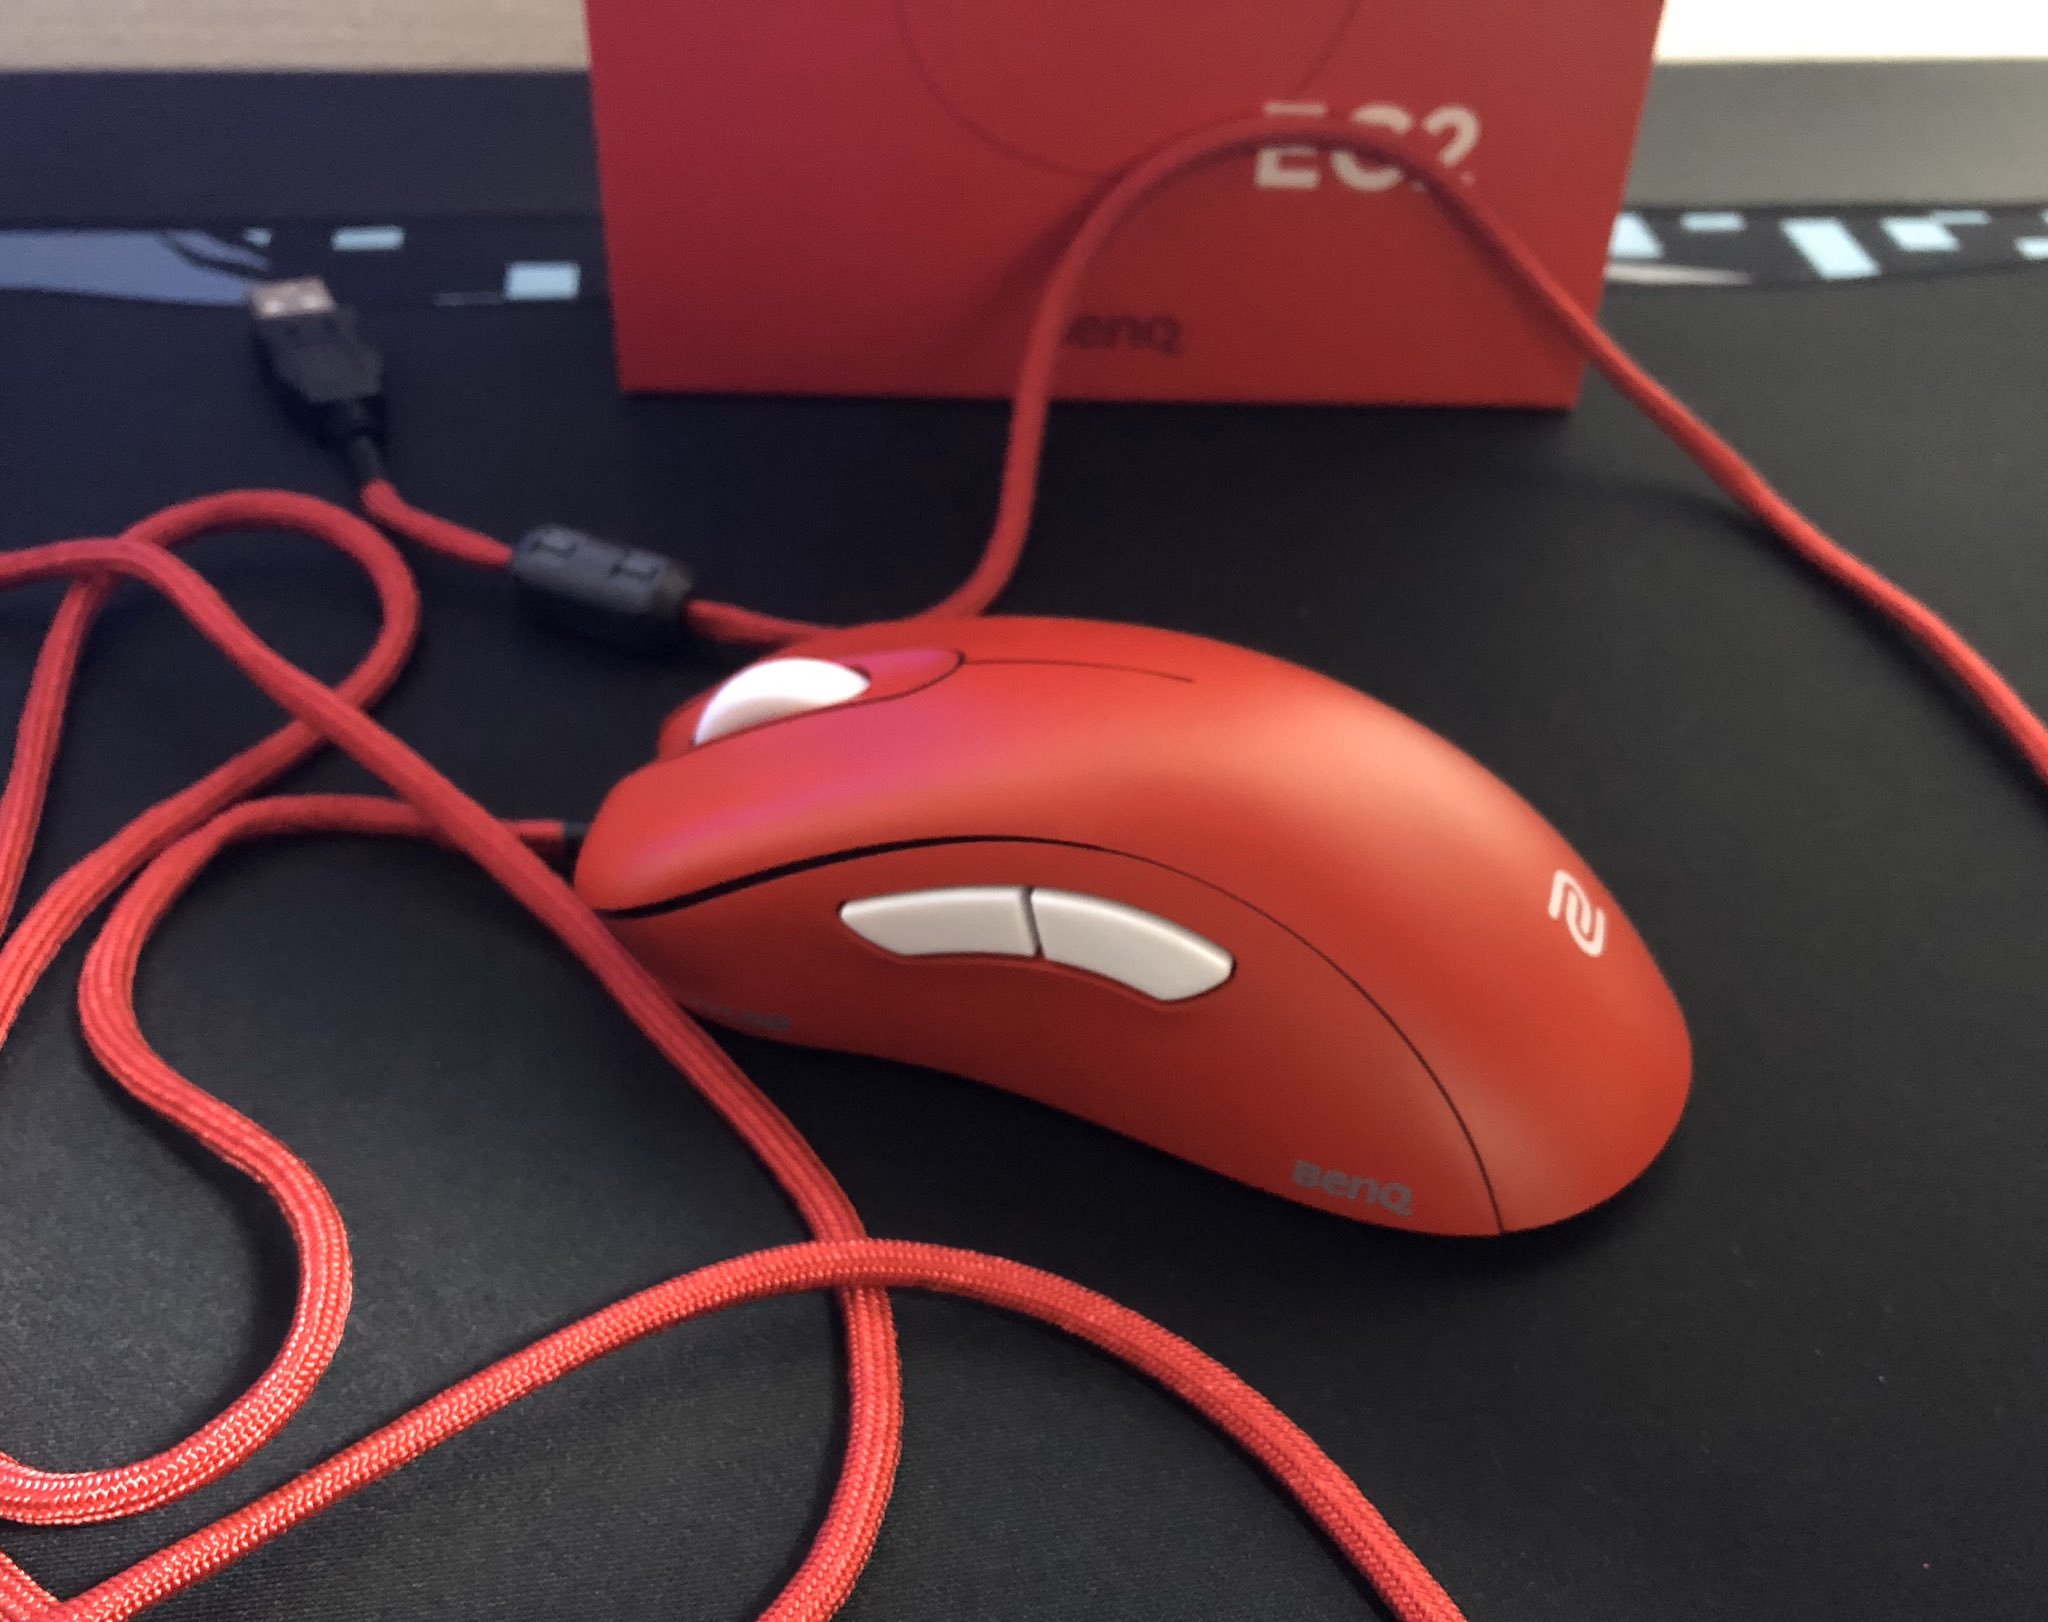 Zowie Ec2 Tyloo Special Edition デバイス沼